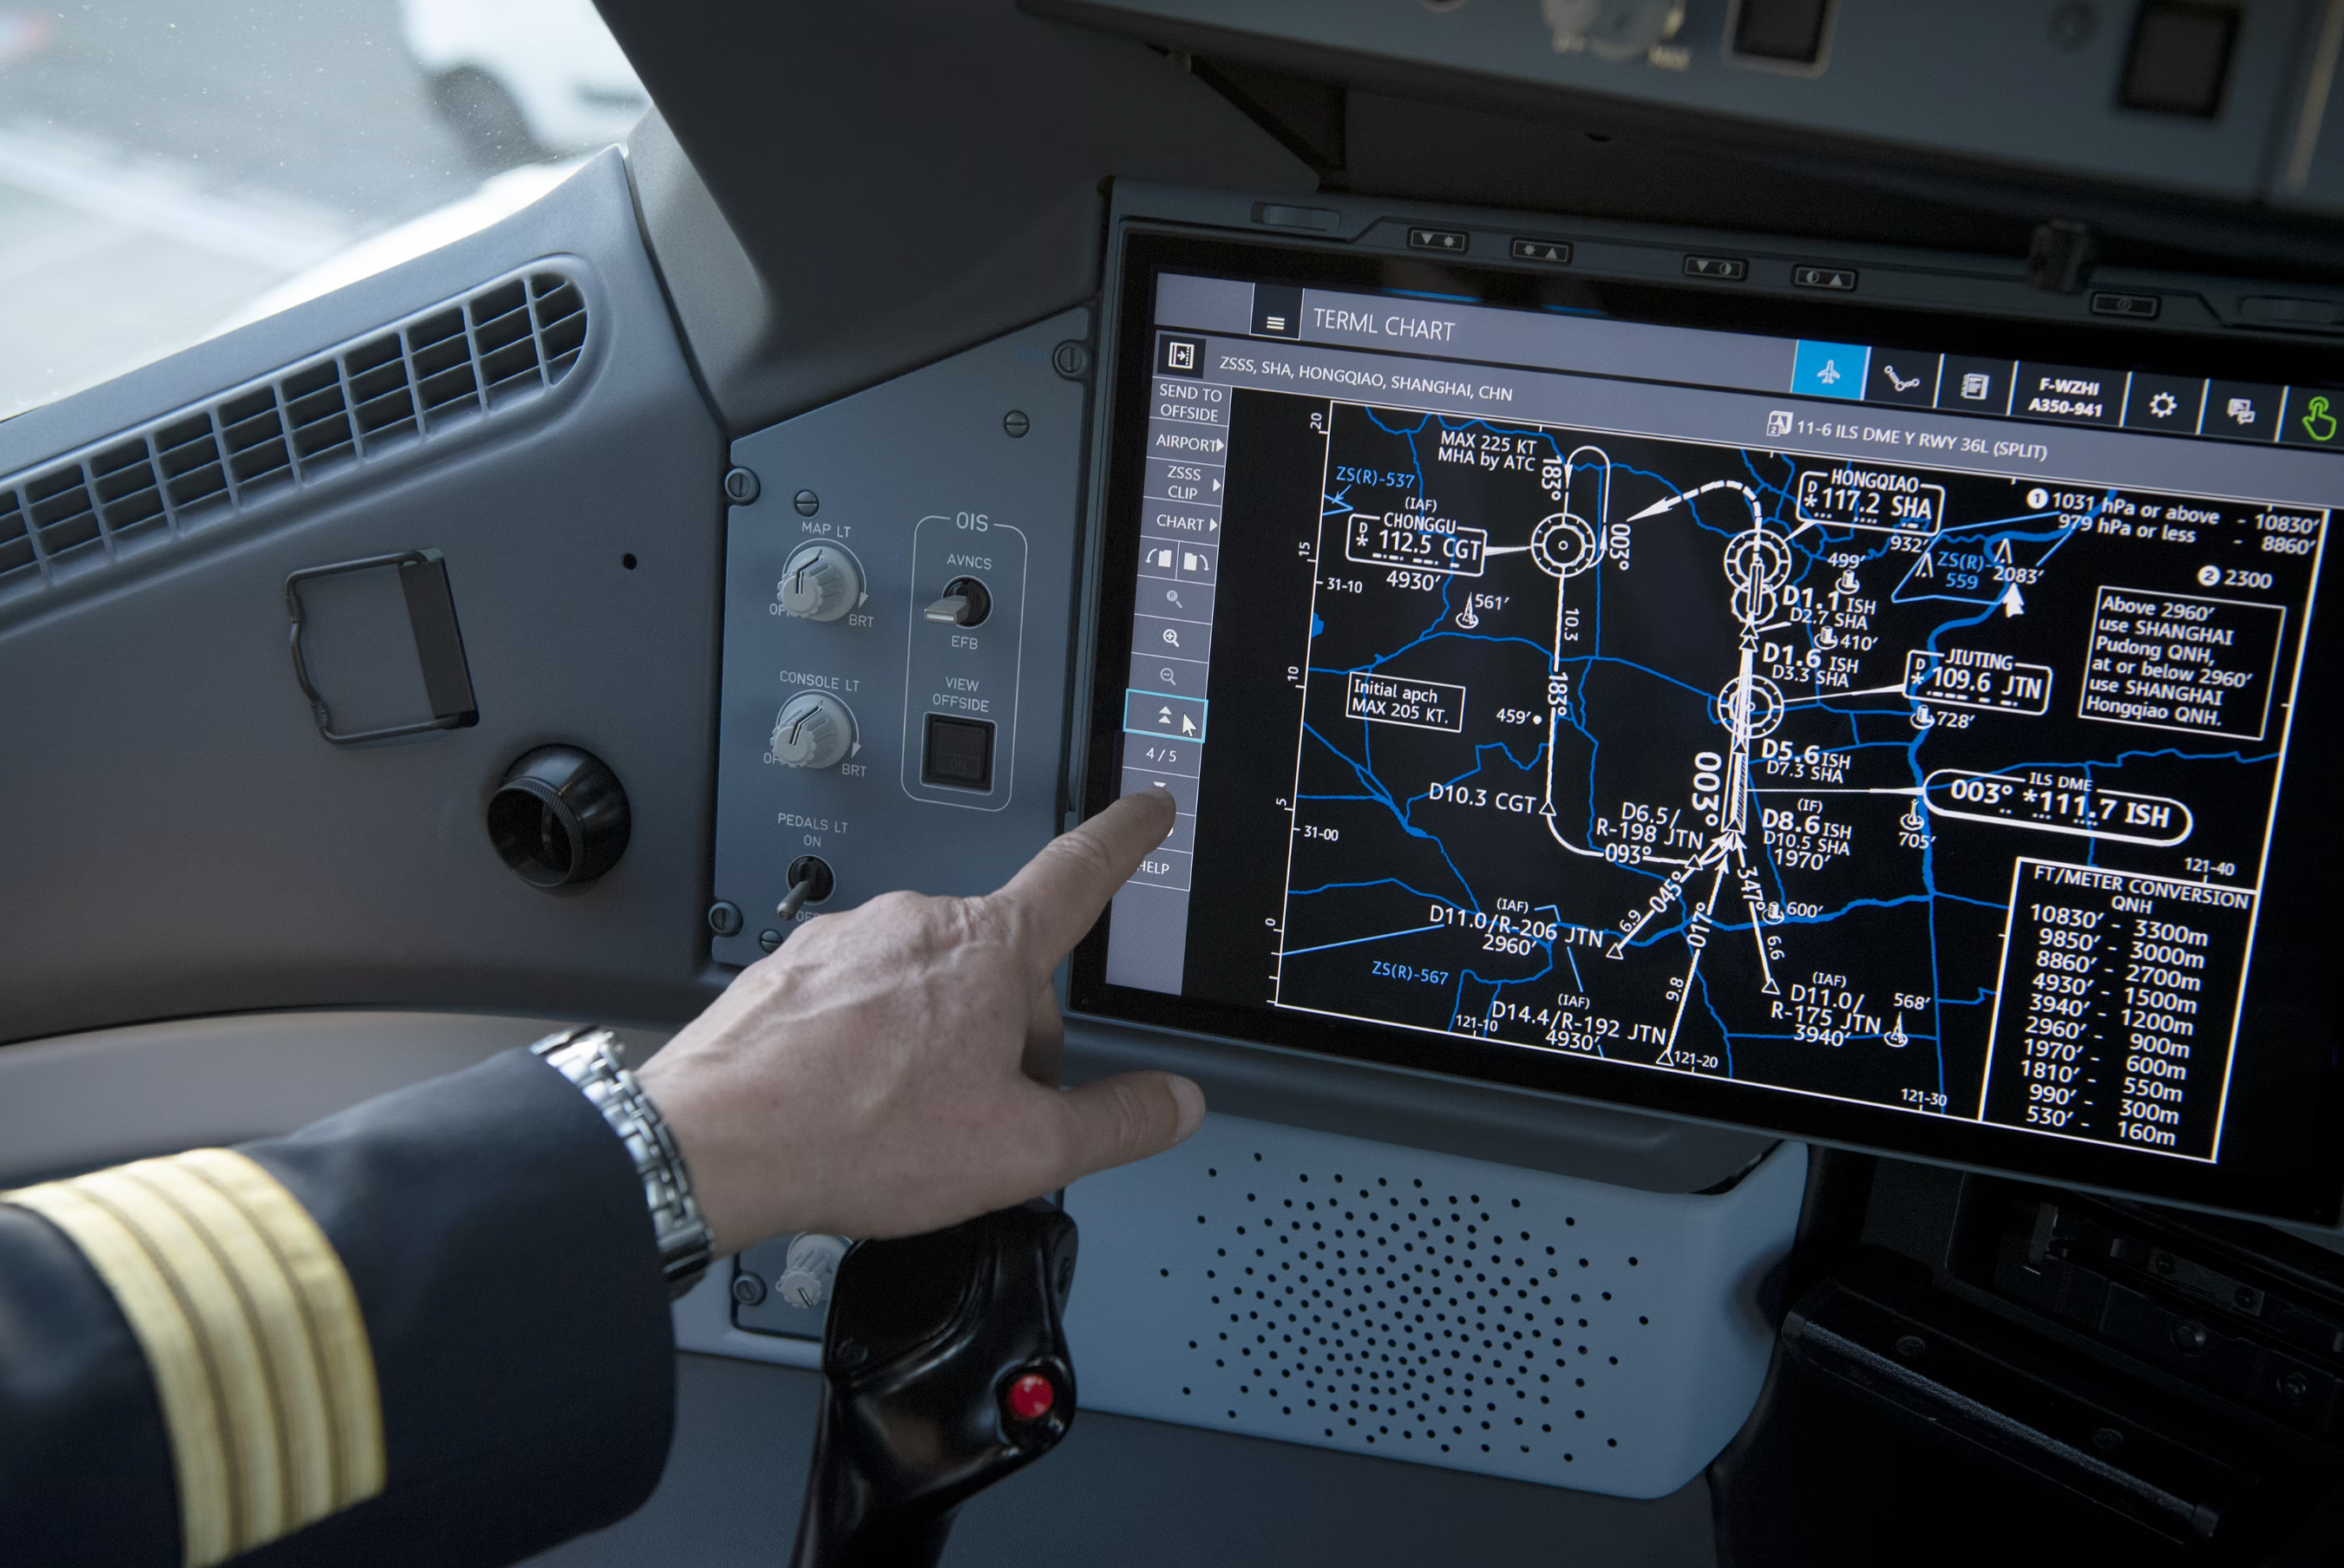 waypoints seen on a touchscreen in an airbus aircraft